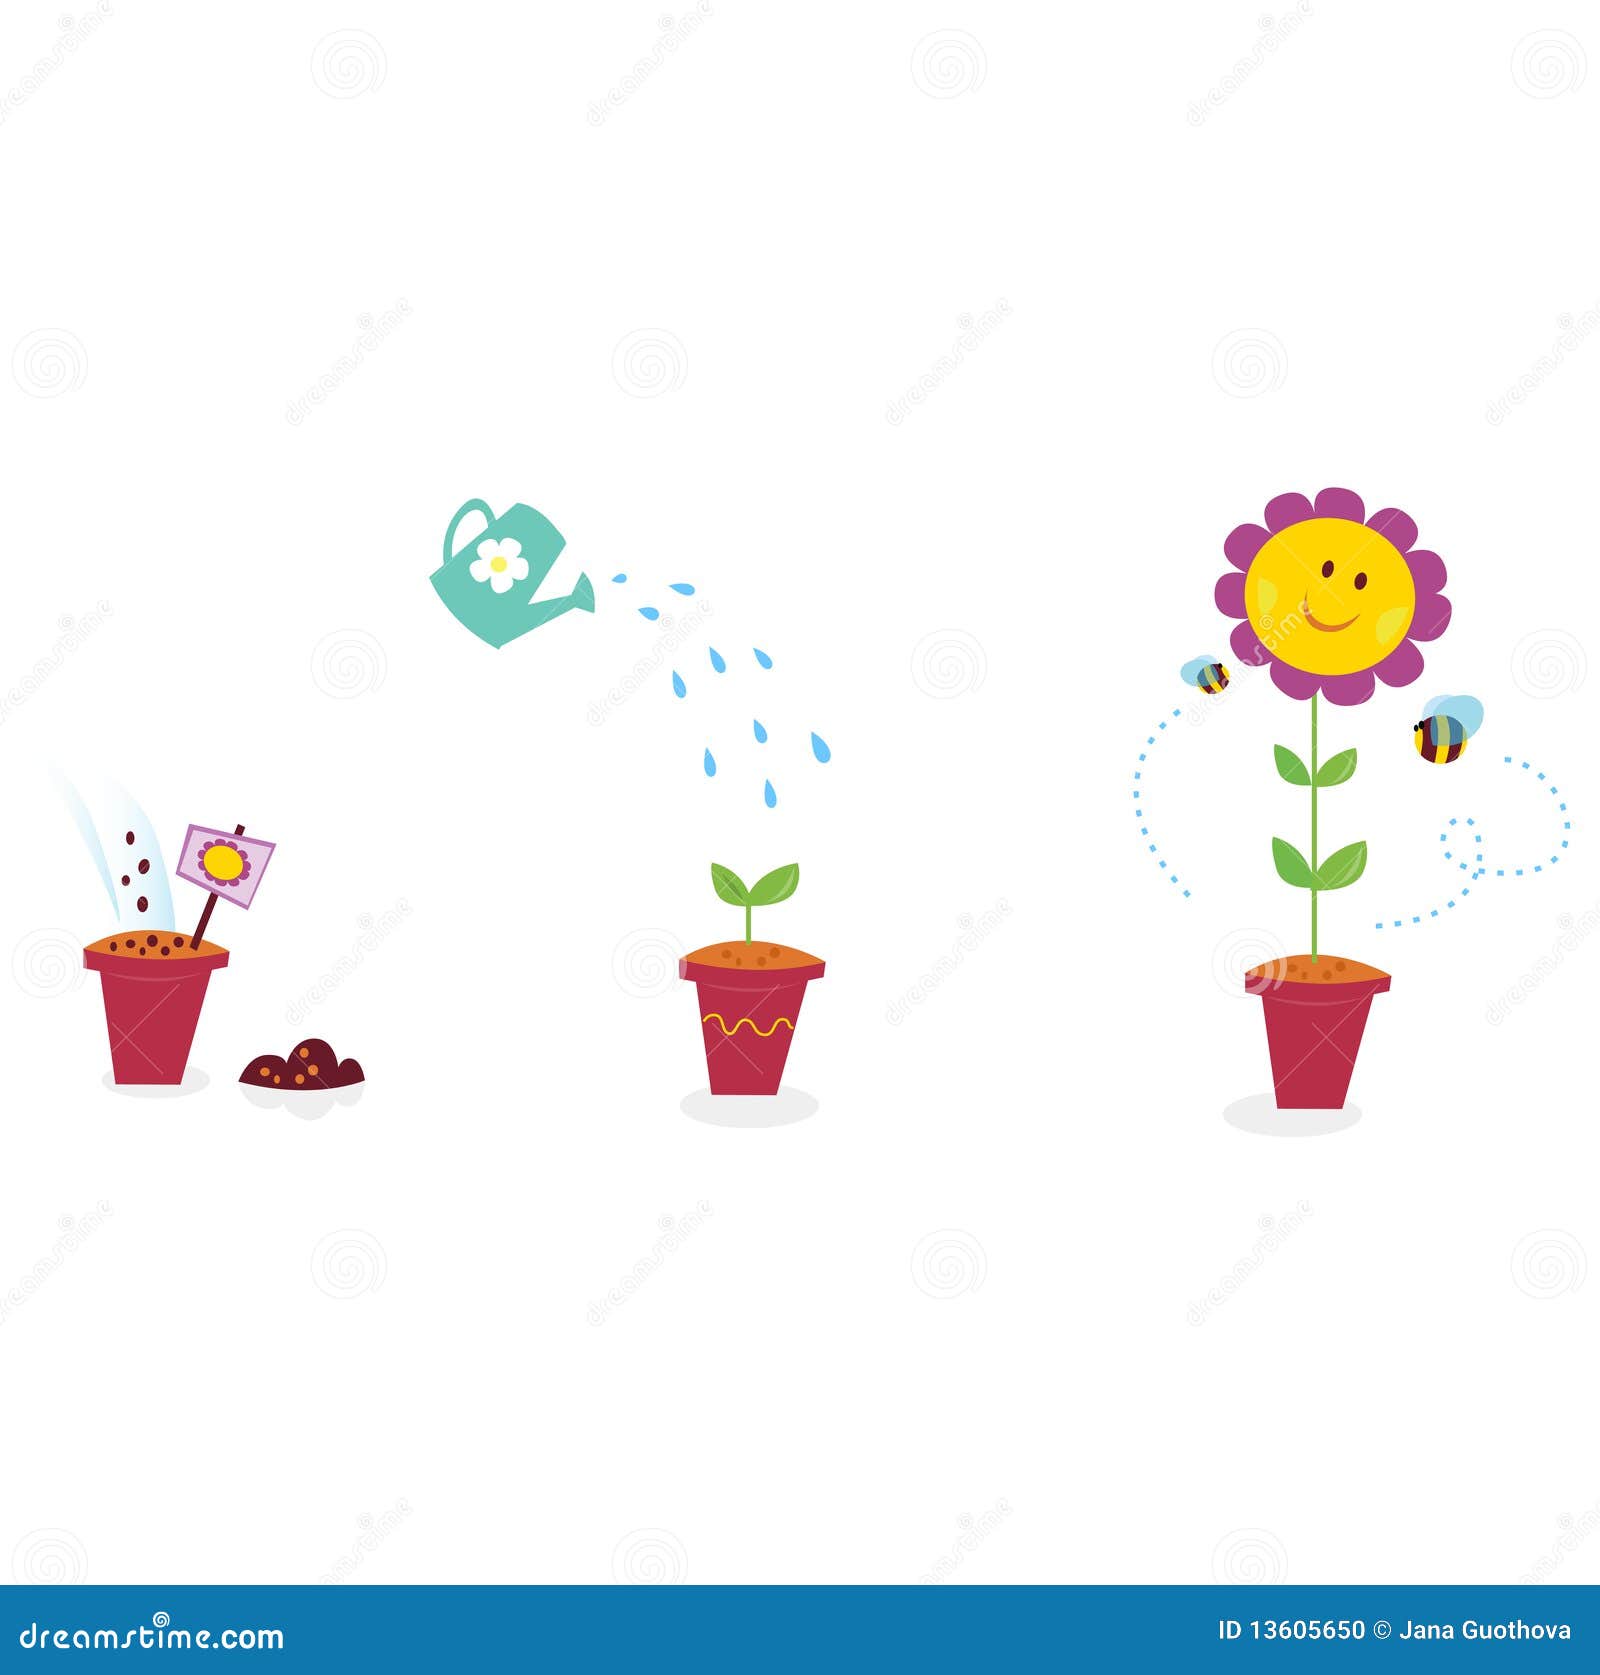 flower growing clipart - photo #24